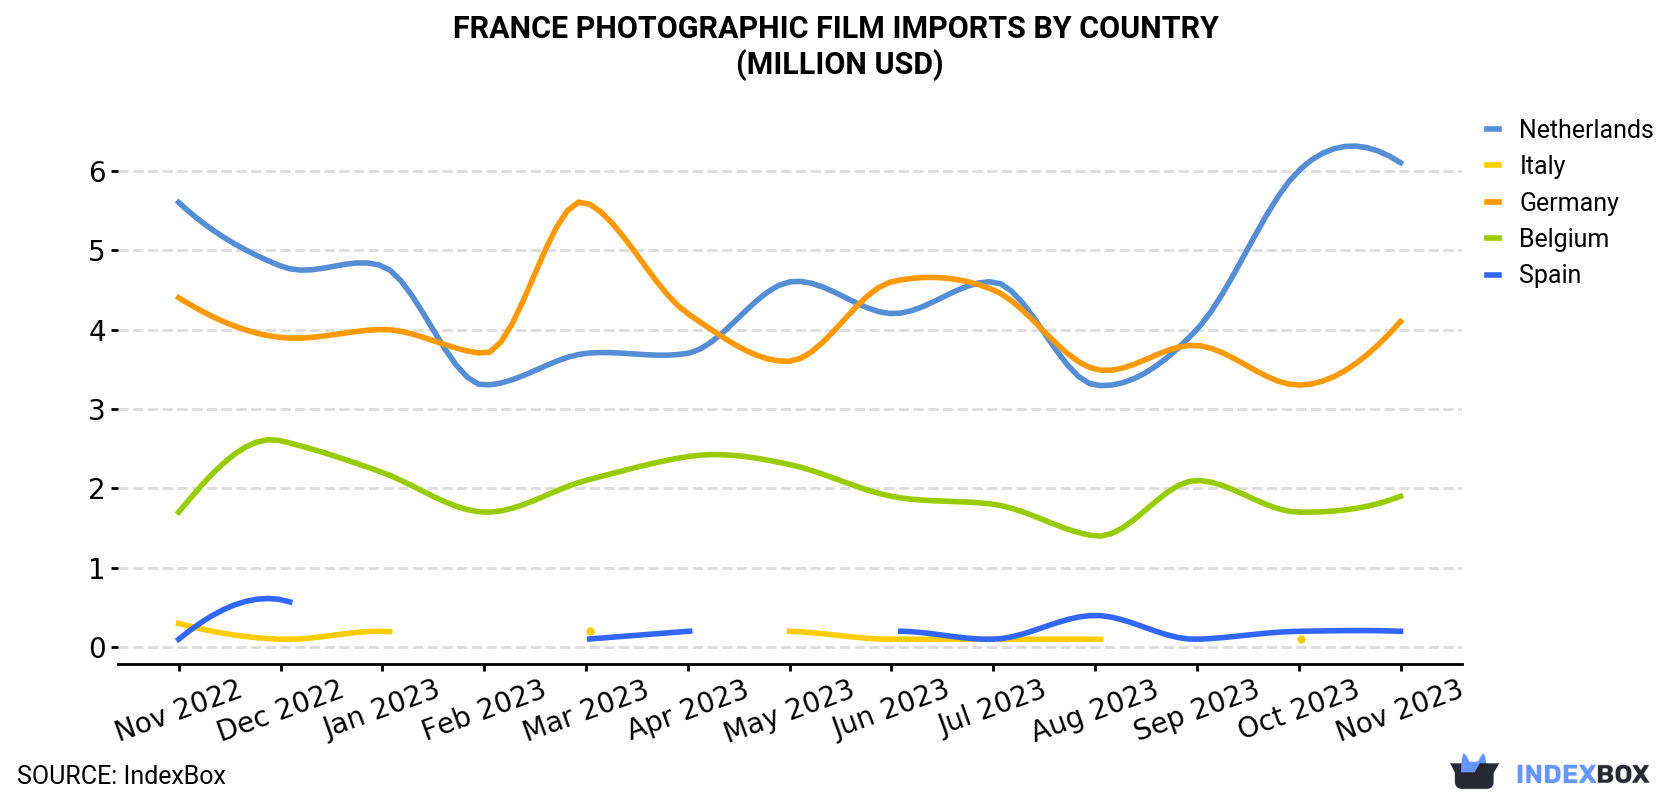 France Photographic Film Imports By Country (Million USD)